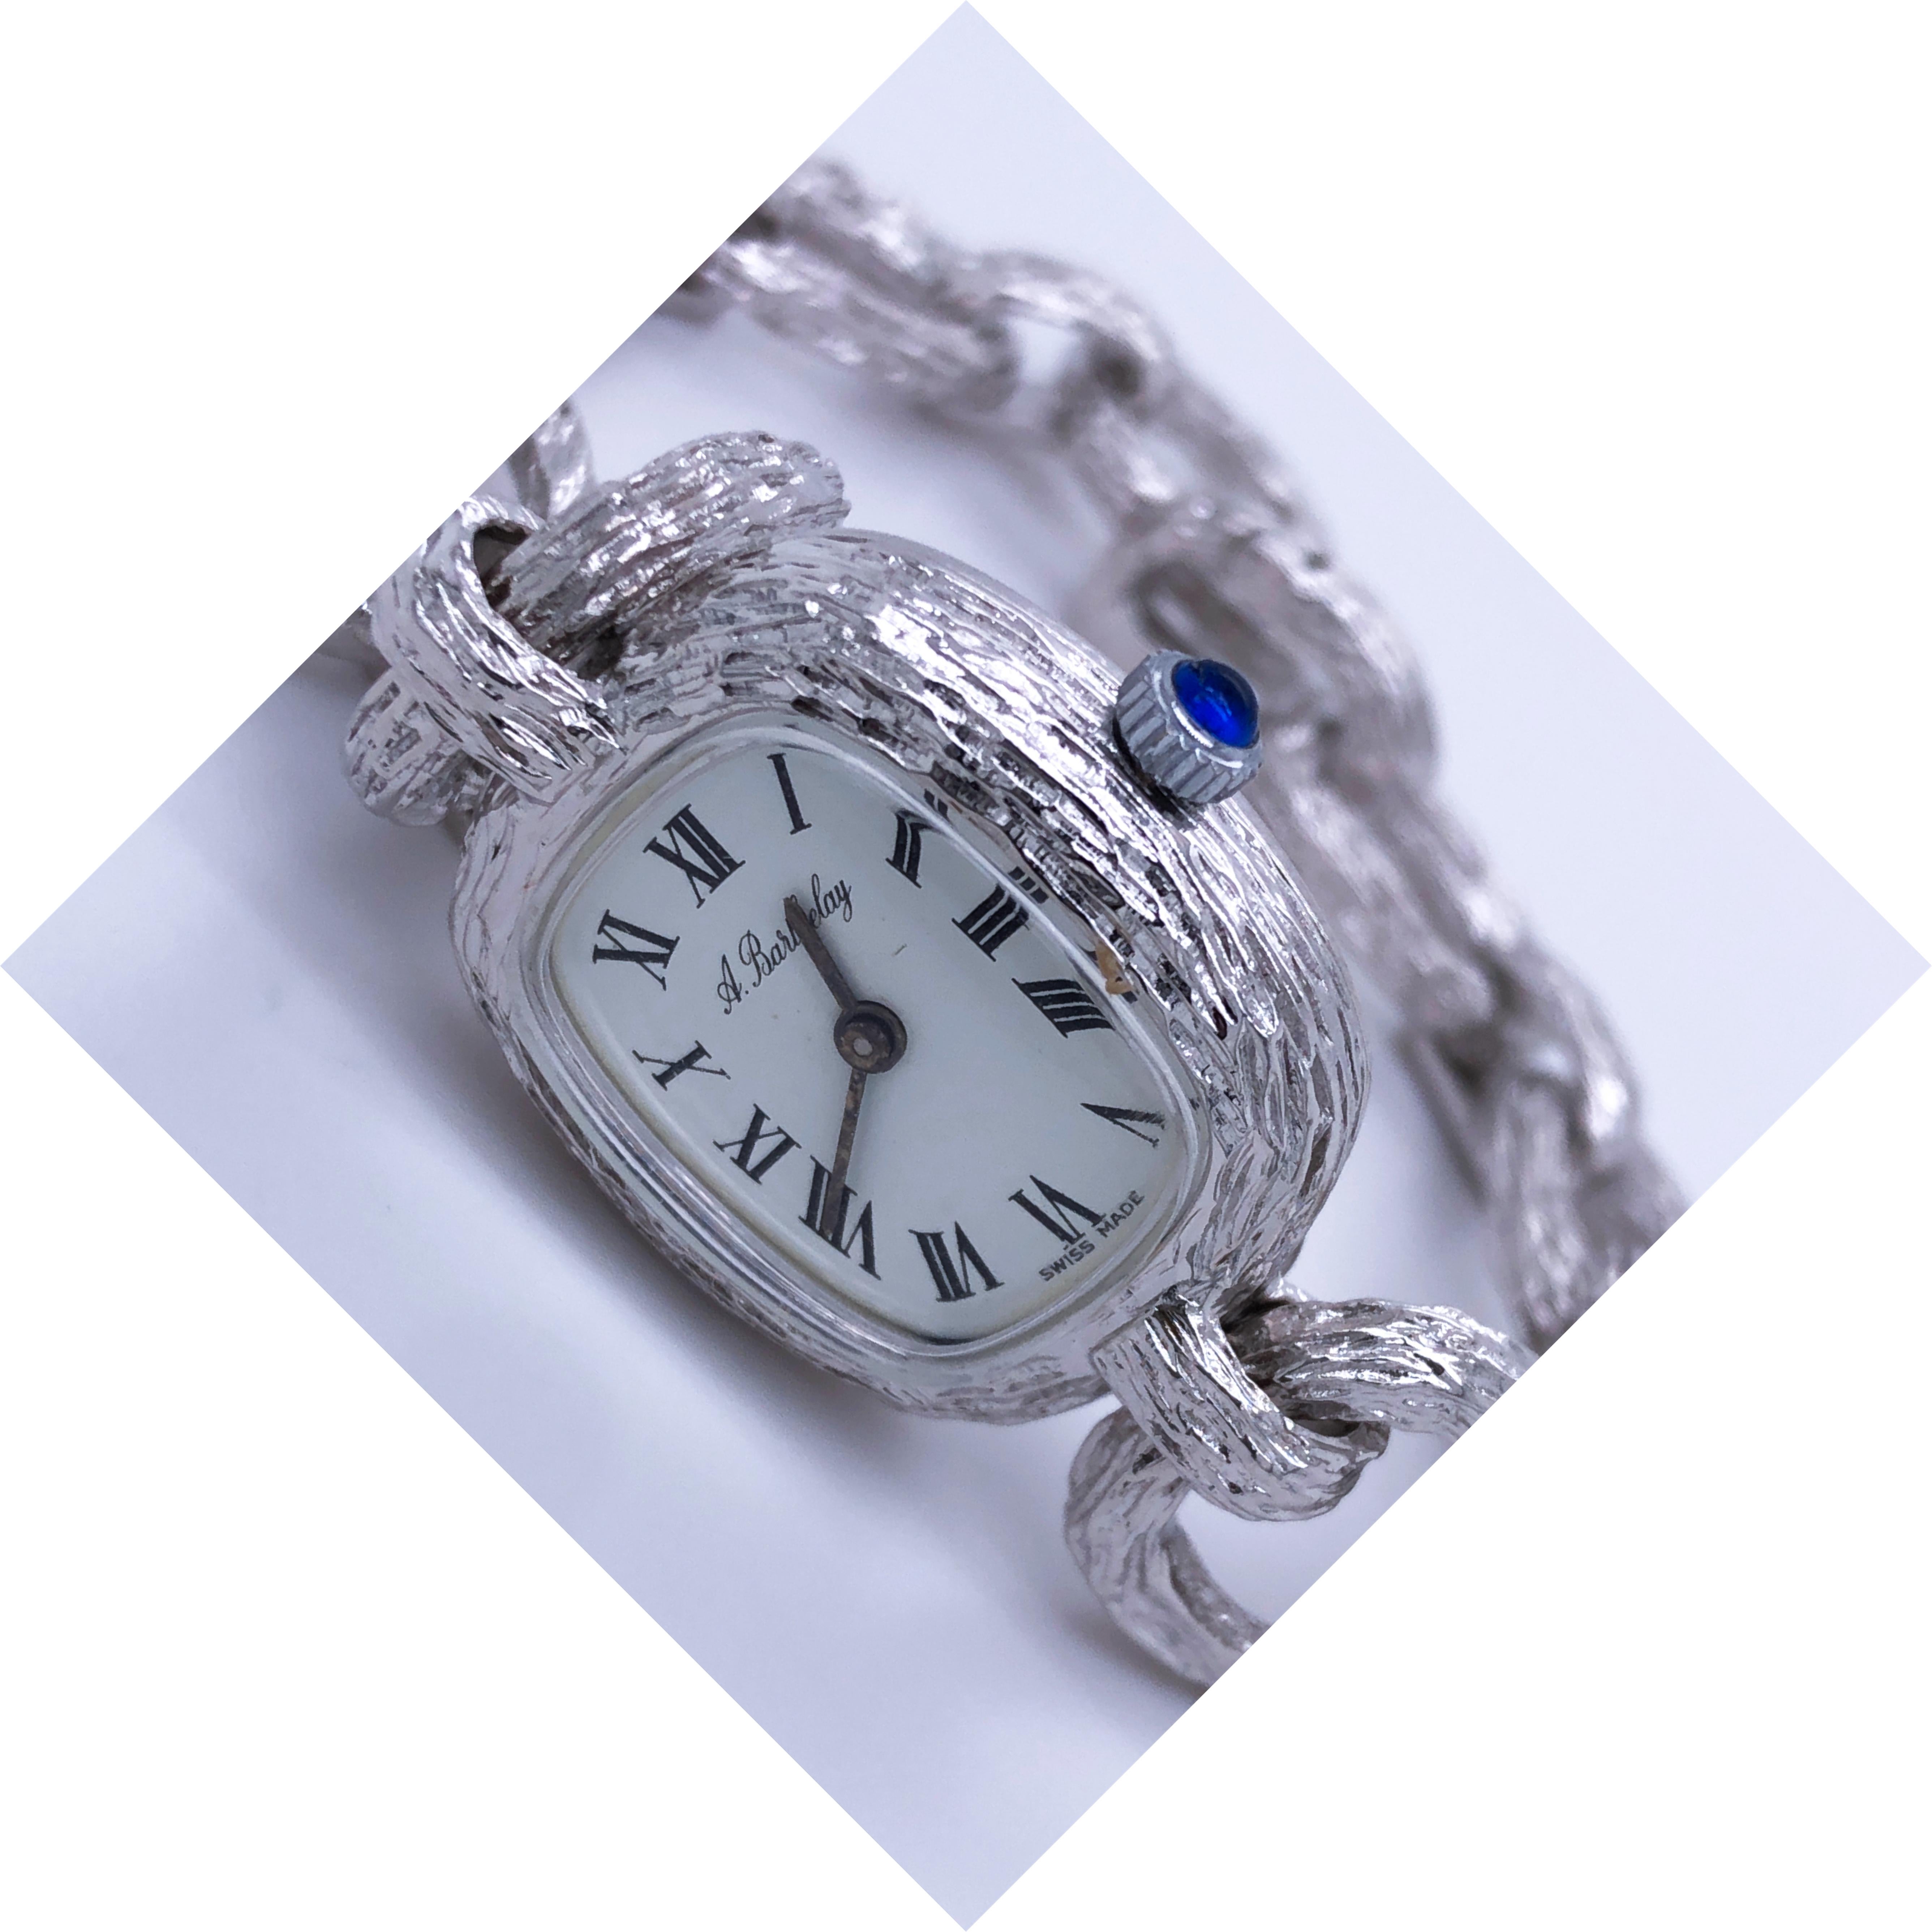 Cabochon Original 1970s Alexis Barthelay Manual-Winding Movement Chain Silver Watch For Sale